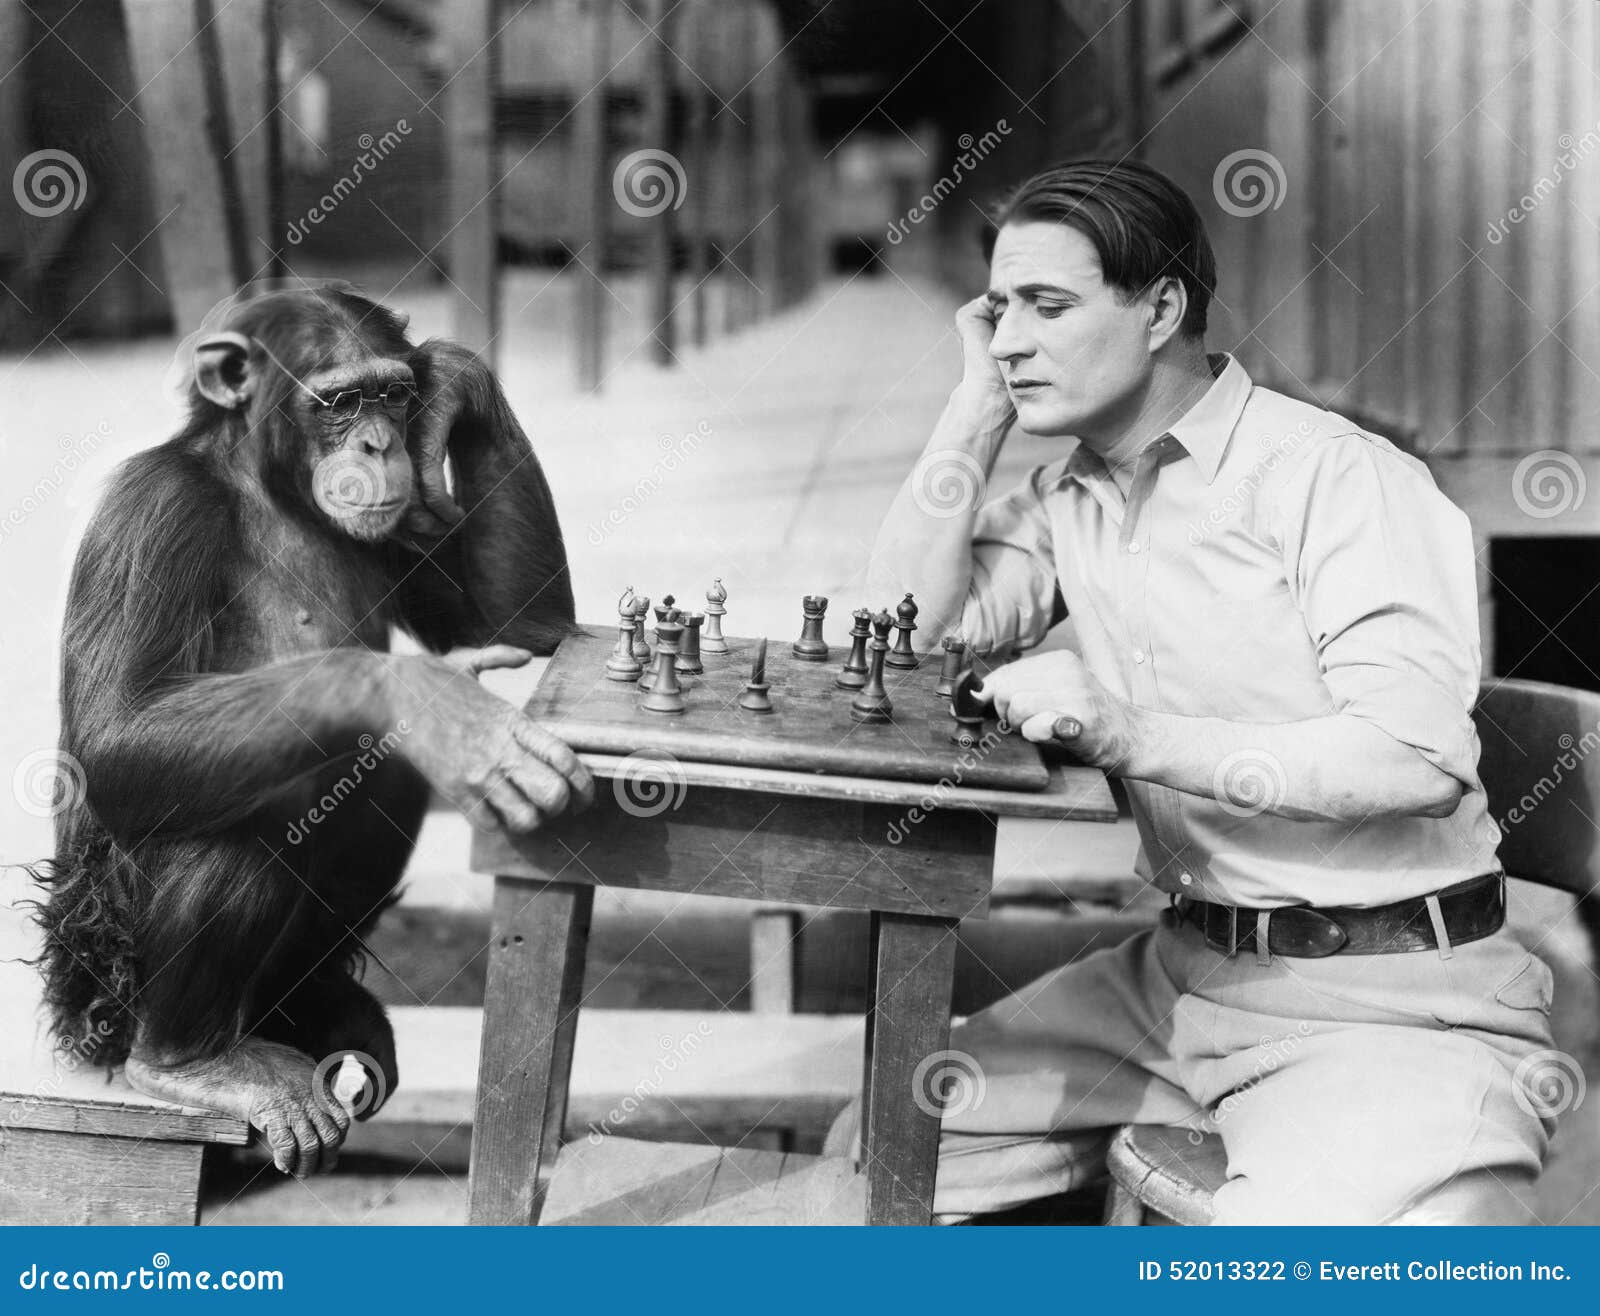 man playing chess with monkey